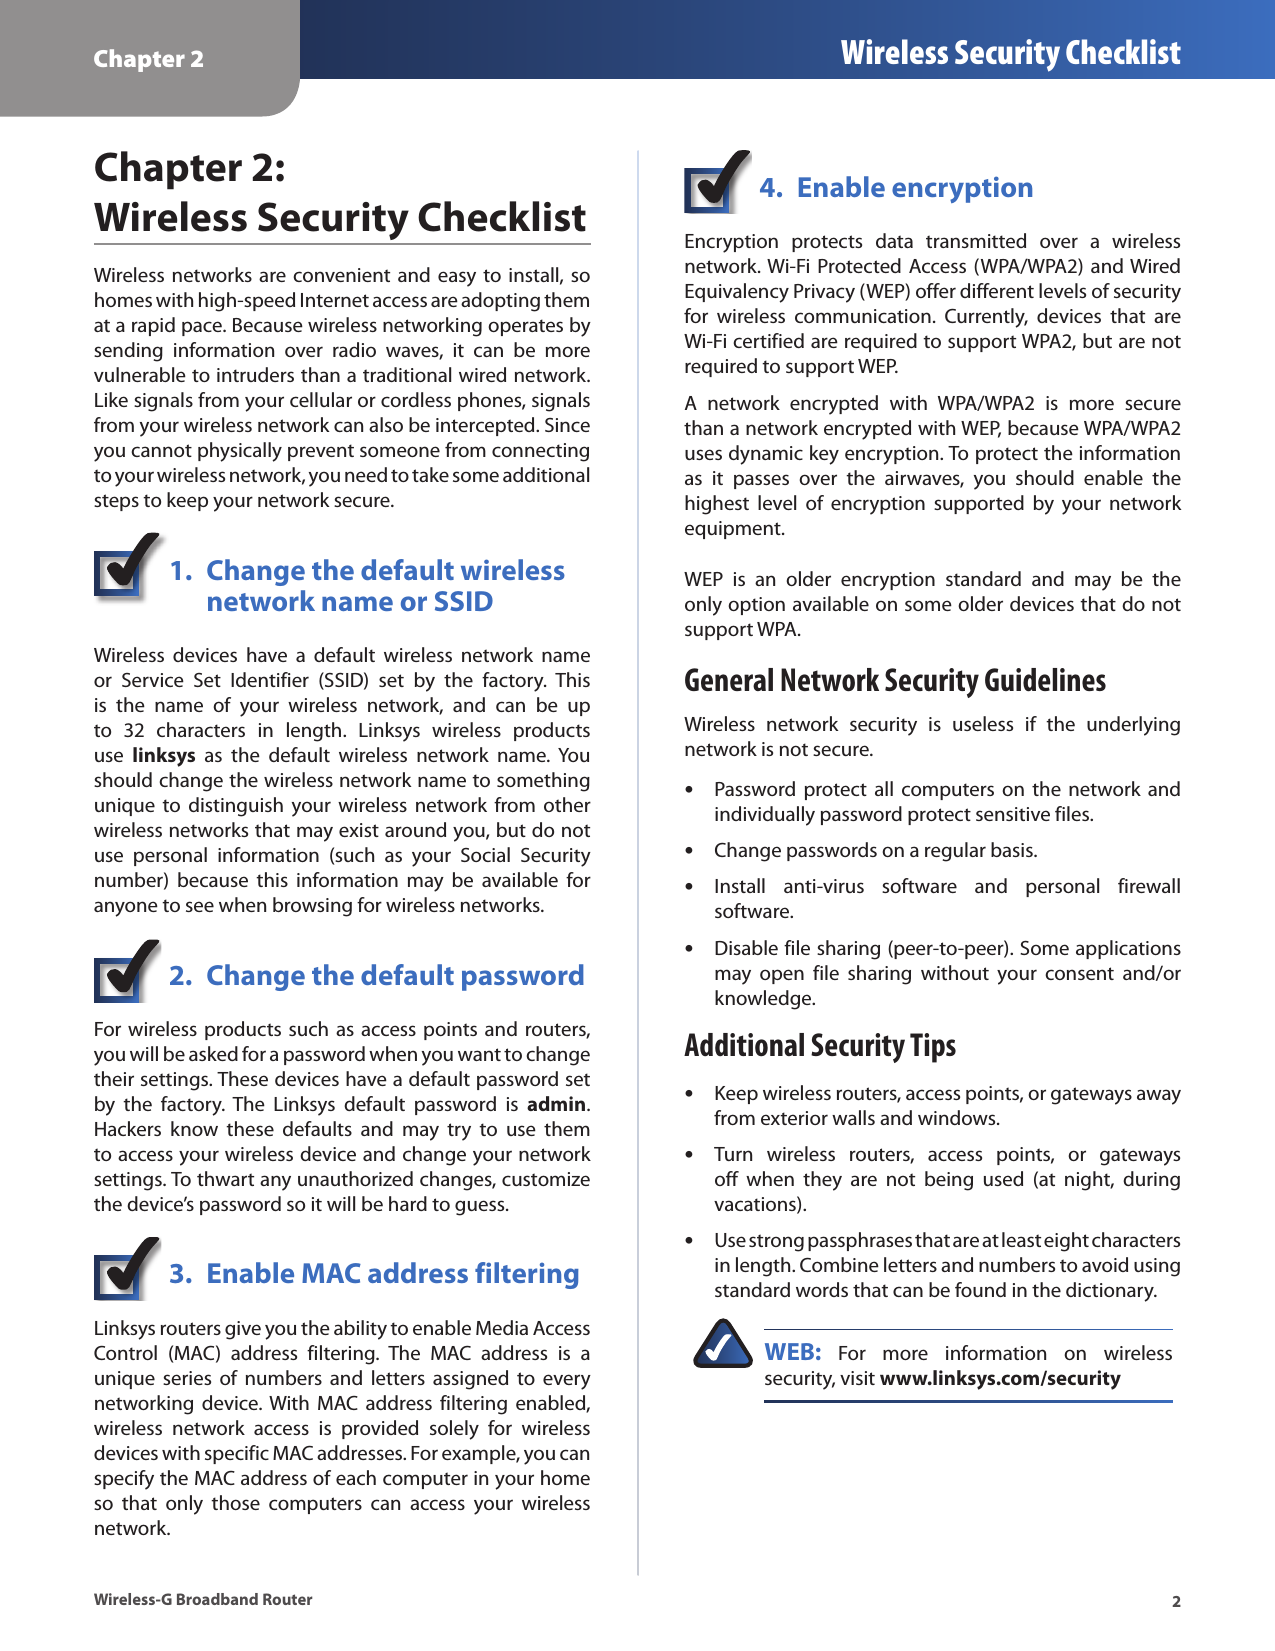 Chapter 2 Wireless Security Checklist2Wireless-G Broadband RouterChapter 2:  Wireless Security ChecklistWireless  networks are convenient  and  easy to install, so homes with high-speed Internet access are adopting them at a rapid pace. Because wireless networking operates by sending  information  over  radio  waves,  it  can  be  more vulnerable to intruders than a traditional wired network. Like signals from your cellular or cordless phones, signals from your wireless network can also be intercepted. Since you cannot physically prevent someone from connecting to your wireless network, you need to take some additional steps to keep your network secure. 1.  Change the default wireless    network name or SSIDWireless  devices  have  a  default  wireless  network  name or  Service  Set  Identifier  (SSID)  set  by  the  factory.  This is  the  name  of  your  wireless  network,  and  can  be  up to  32  characters  in  length.  Linksys  wireless  products use  linksys  as  the  default  wireless  network  name.  You should change the wireless network name to something unique  to distinguish  your wireless  network from  other wireless networks that may exist around you, but do not use  personal  information  (such  as  your  Social  Security number)  because  this  information  may  be  available  for anyone to see when browsing for wireless networks. 2.  Change the default passwordFor wireless products such as access points and routers, you will be asked for a password when you want to change their settings. These devices have a default password set by  the  factory.  The  Linksys  default  password  is  admin. Hackers  know  these  defaults  and  may  try  to  use  them to access your wireless device and change your network settings. To thwart any unauthorized changes, customize the device’s password so it will be hard to guess.3.  Enable MAC address filteringLinksys routers give you the ability to enable Media Access Control  (MAC)  address  filtering.  The  MAC  address  is  a unique  series  of  numbers  and  letters  assigned  to  every networking  device. With MAC  address  filtering  enabled, wireless  network  access  is  provided  solely  for  wireless devices with specific MAC addresses. For example, you can specify the MAC address of each computer in your home so  that  only  those  computers  can  access  your  wireless network. 4.  Enable encryptionEncryption  protects  data  transmitted  over  a  wireless network. Wi-Fi  Protected Access (WPA/WPA2)  and Wired Equivalency Privacy (WEP) offer different levels of security for  wireless  communication.  Currently,  devices  that  are Wi-Fi certified are required to support WPA2, but are not required to support WEP.A  network  encrypted  with  WPA/WPA2  is  more  secure than a network encrypted with WEP, because WPA/WPA2 uses dynamic key encryption. To protect the information as  it  passes  over  the  airwaves,  you  should  enable  the highest  level  of  encryption  supported  by  your  network equipment. WEP  is  an  older  encryption  standard  and  may  be  the only option available on some older devices that do not support WPA.General Network Security GuidelinesWireless  network  security  is  useless  if  the  underlying network is not secure. Password protect  all computers on  the network  and individually password protect sensitive files.Change passwords on a regular basis.Install  anti-virus  software  and  personal  firewall software.Disable file sharing (peer-to-peer). Some applications may  open  file  sharing  without  your  consent  and/or knowledge.Additional Security TipsKeep wireless routers, access points, or gateways away from exterior walls and windows.Turn  wireless  routers,  access  points,  or  gateways off  when  they  are  not  being  used  (at  night,  during vacations).Use strong passphrases that are at least eight characters in length. Combine letters and numbers to avoid using standard words that can be found in the dictionary. WEB:  For  more  information  on  wireless security, visit www.linksys.com/security•••••••